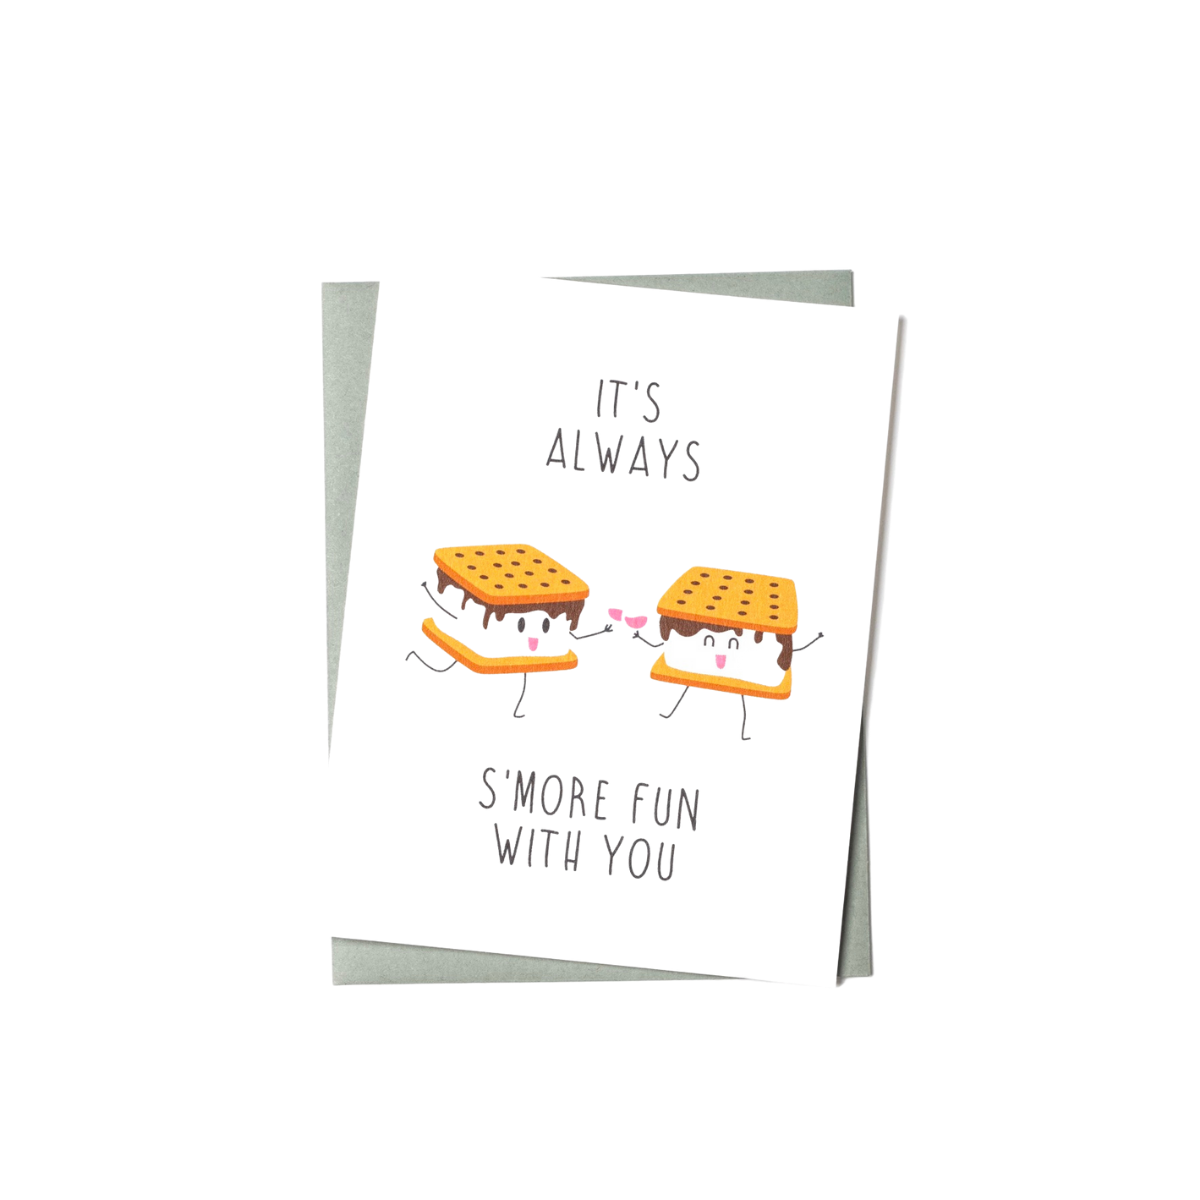 friendship appreciation card with illustration of two s'mores toasting each other with glasses of wine and having fun.